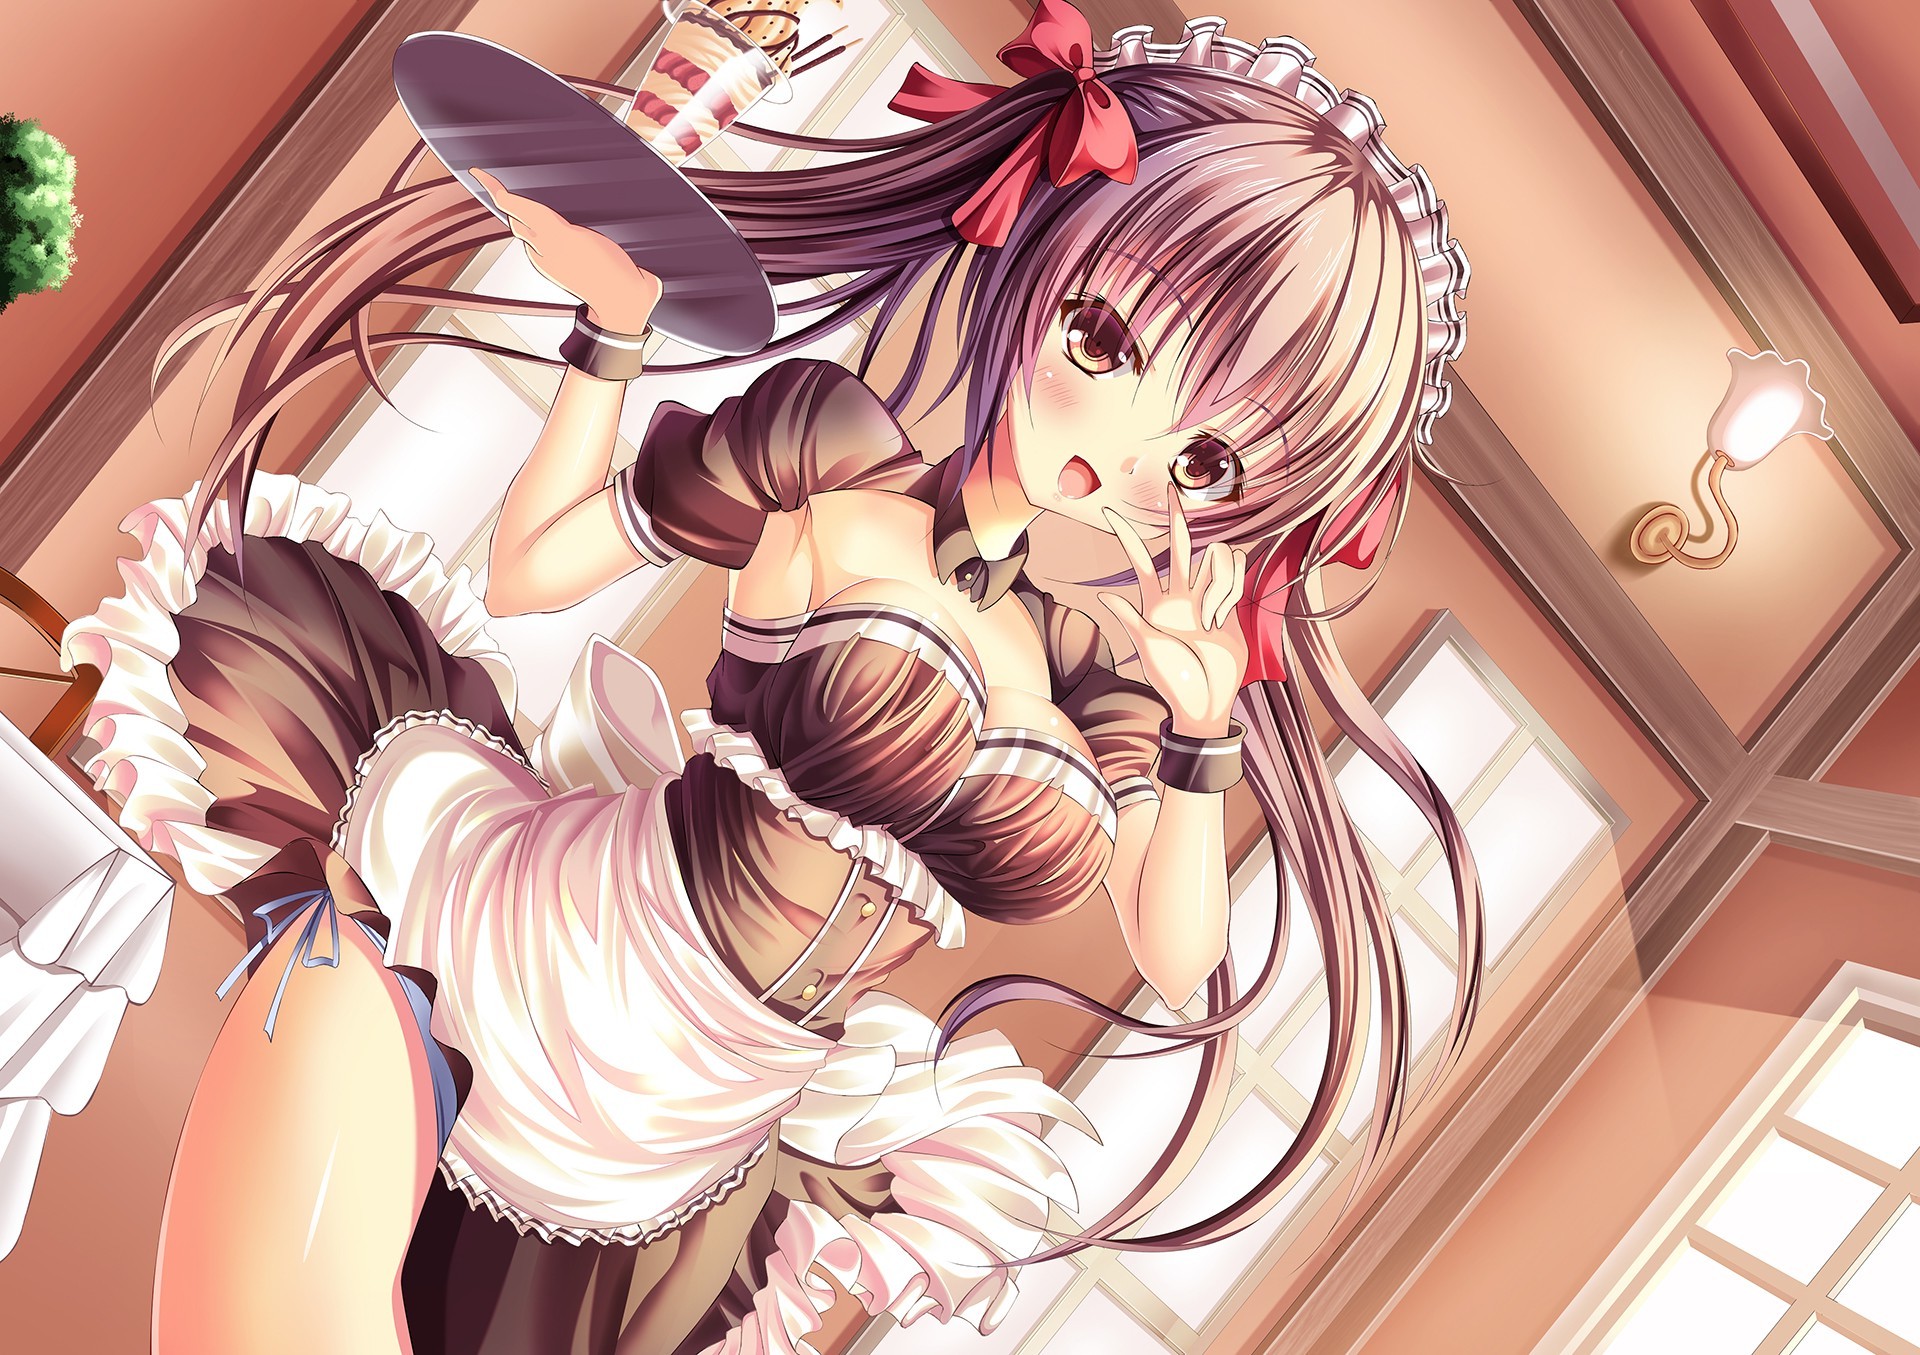 original Characters, Anime, Anime Girls, Maid, Maid Outfit Wallpaper